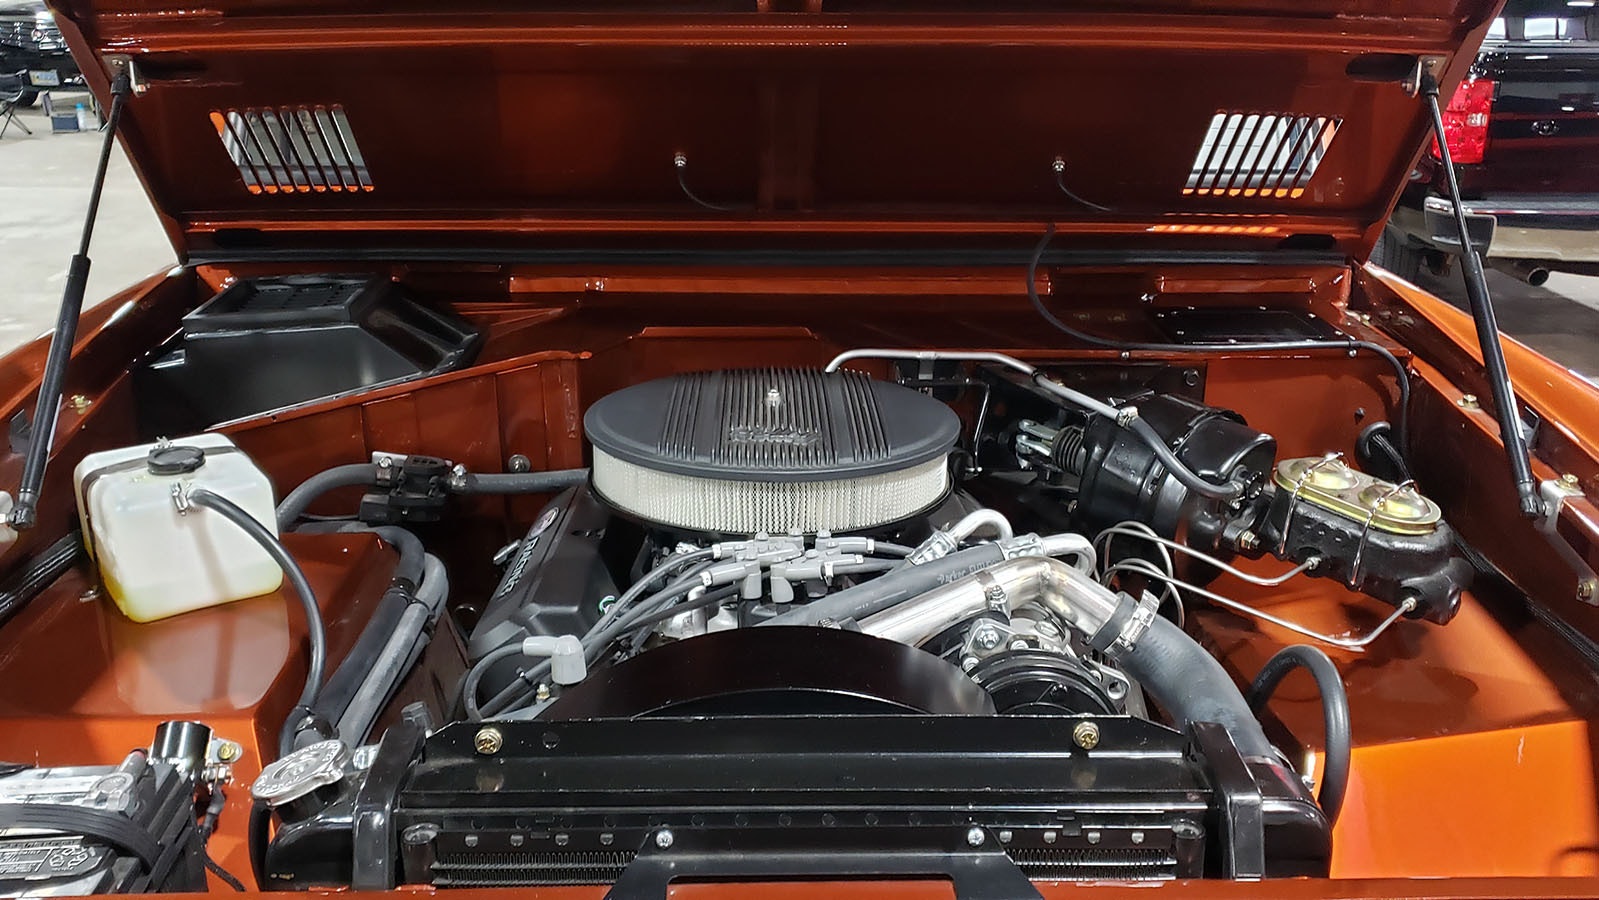 A little peek under the hood of this restored 1976 Ford Bronco.